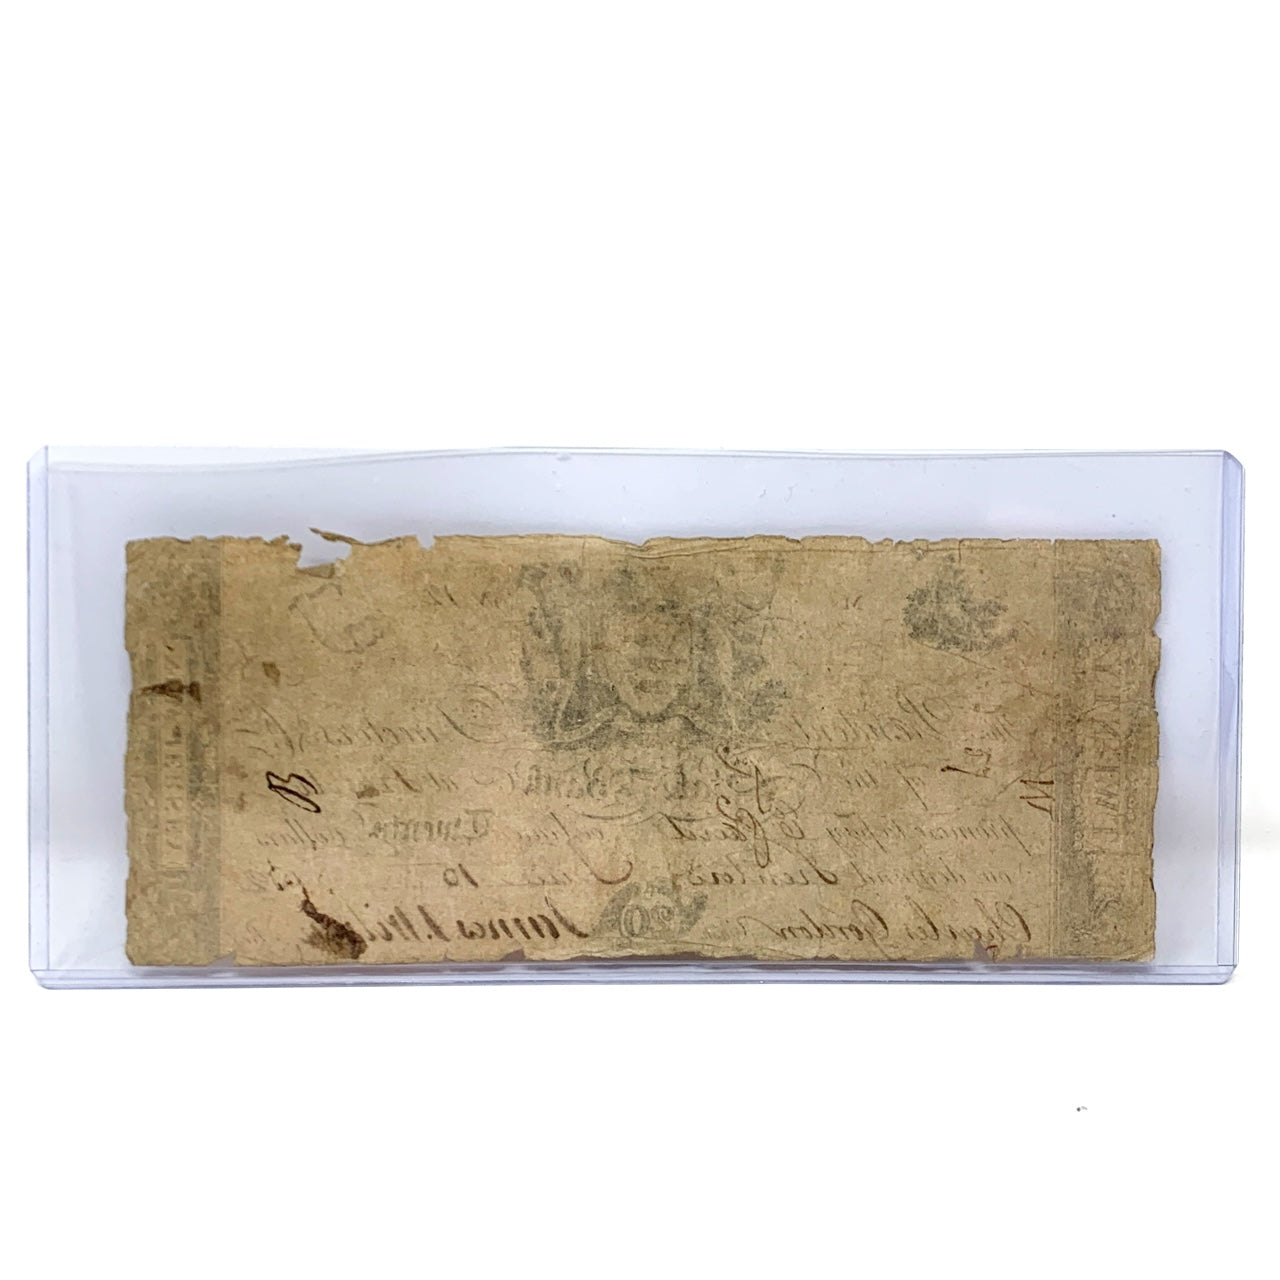 1812 $20 Trenton NJ State Bank Obsolete Currency